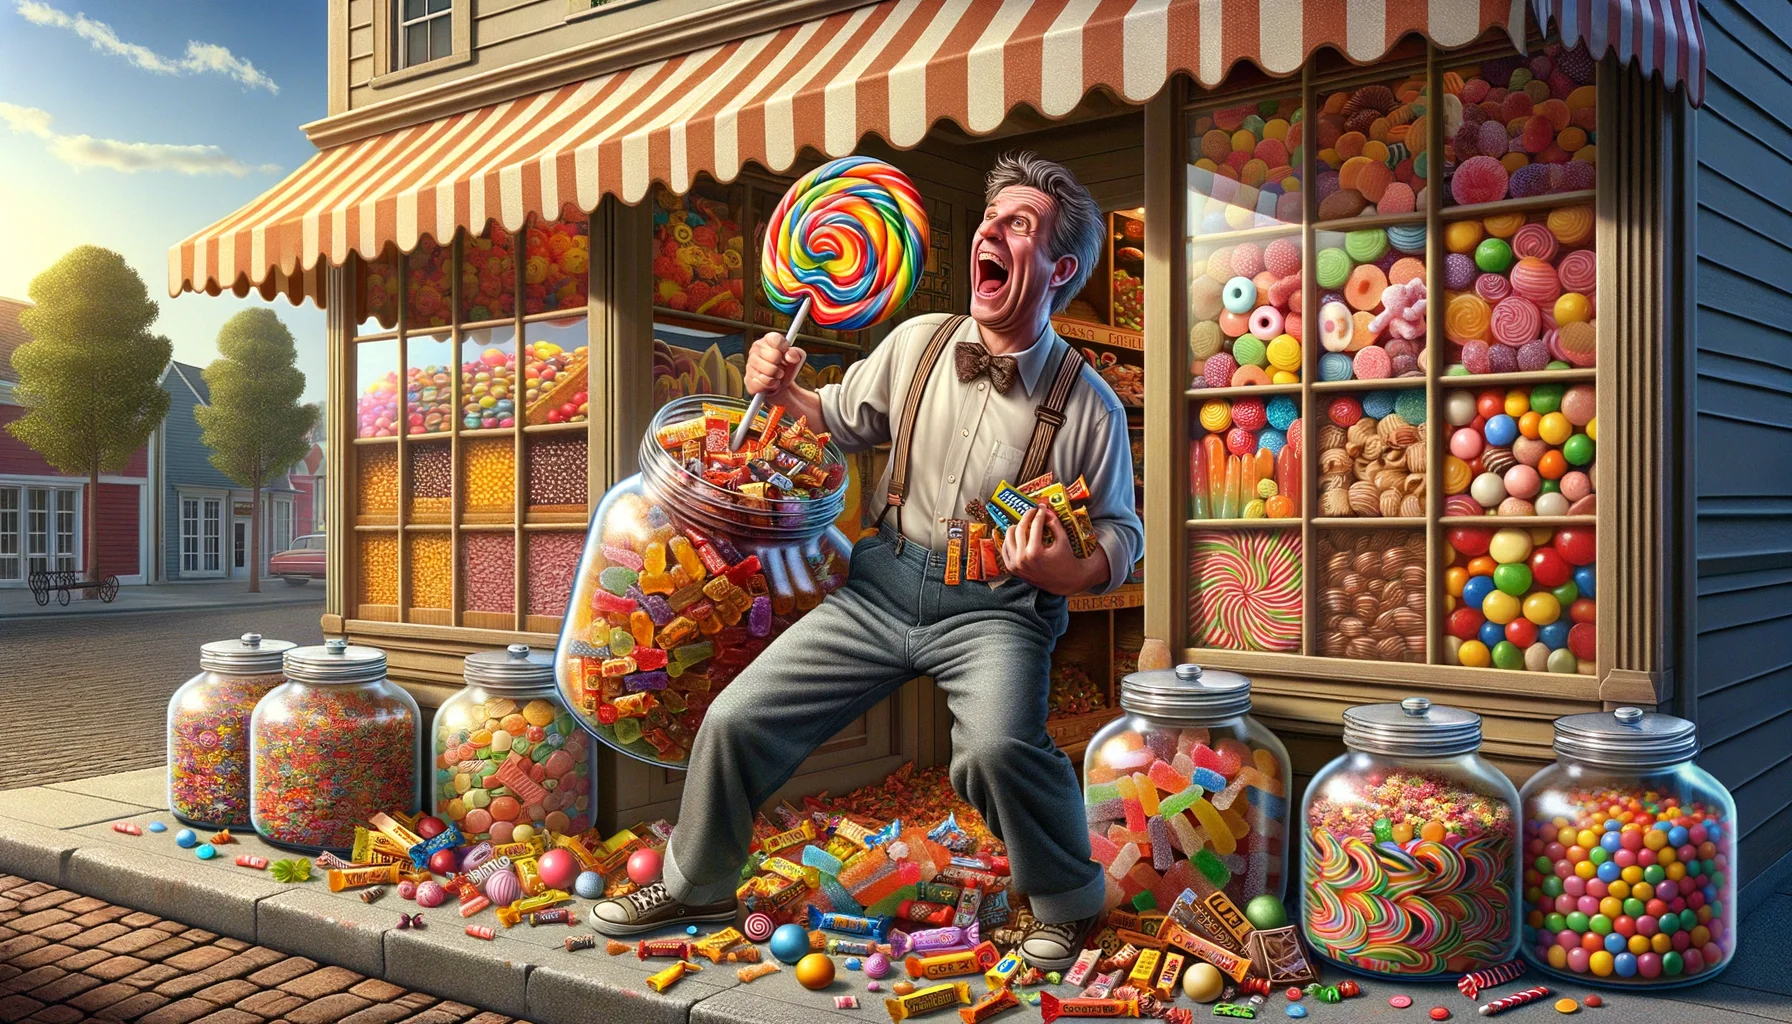 Construct a well-detailed, realistic and humorous image of a large quantity of candy. In this image, a variety of colourful sweets spills out from various oversized jars against a background of a charming old-time candy store, complete with wooden shelves and striped awnings. Each piece of candy is meticulously detailed, from shiny gummy bears to swirling lollipops. A spectator, a middle-aged Caucasian man with a child-like joy on his face, is excitedly marvelling at the sight in front of him. His pockets are bulging, hilariously overstuffed with sweets. He holds a massive colourful lollipop in one hand, which he enjoys with an enthusiastic lick.